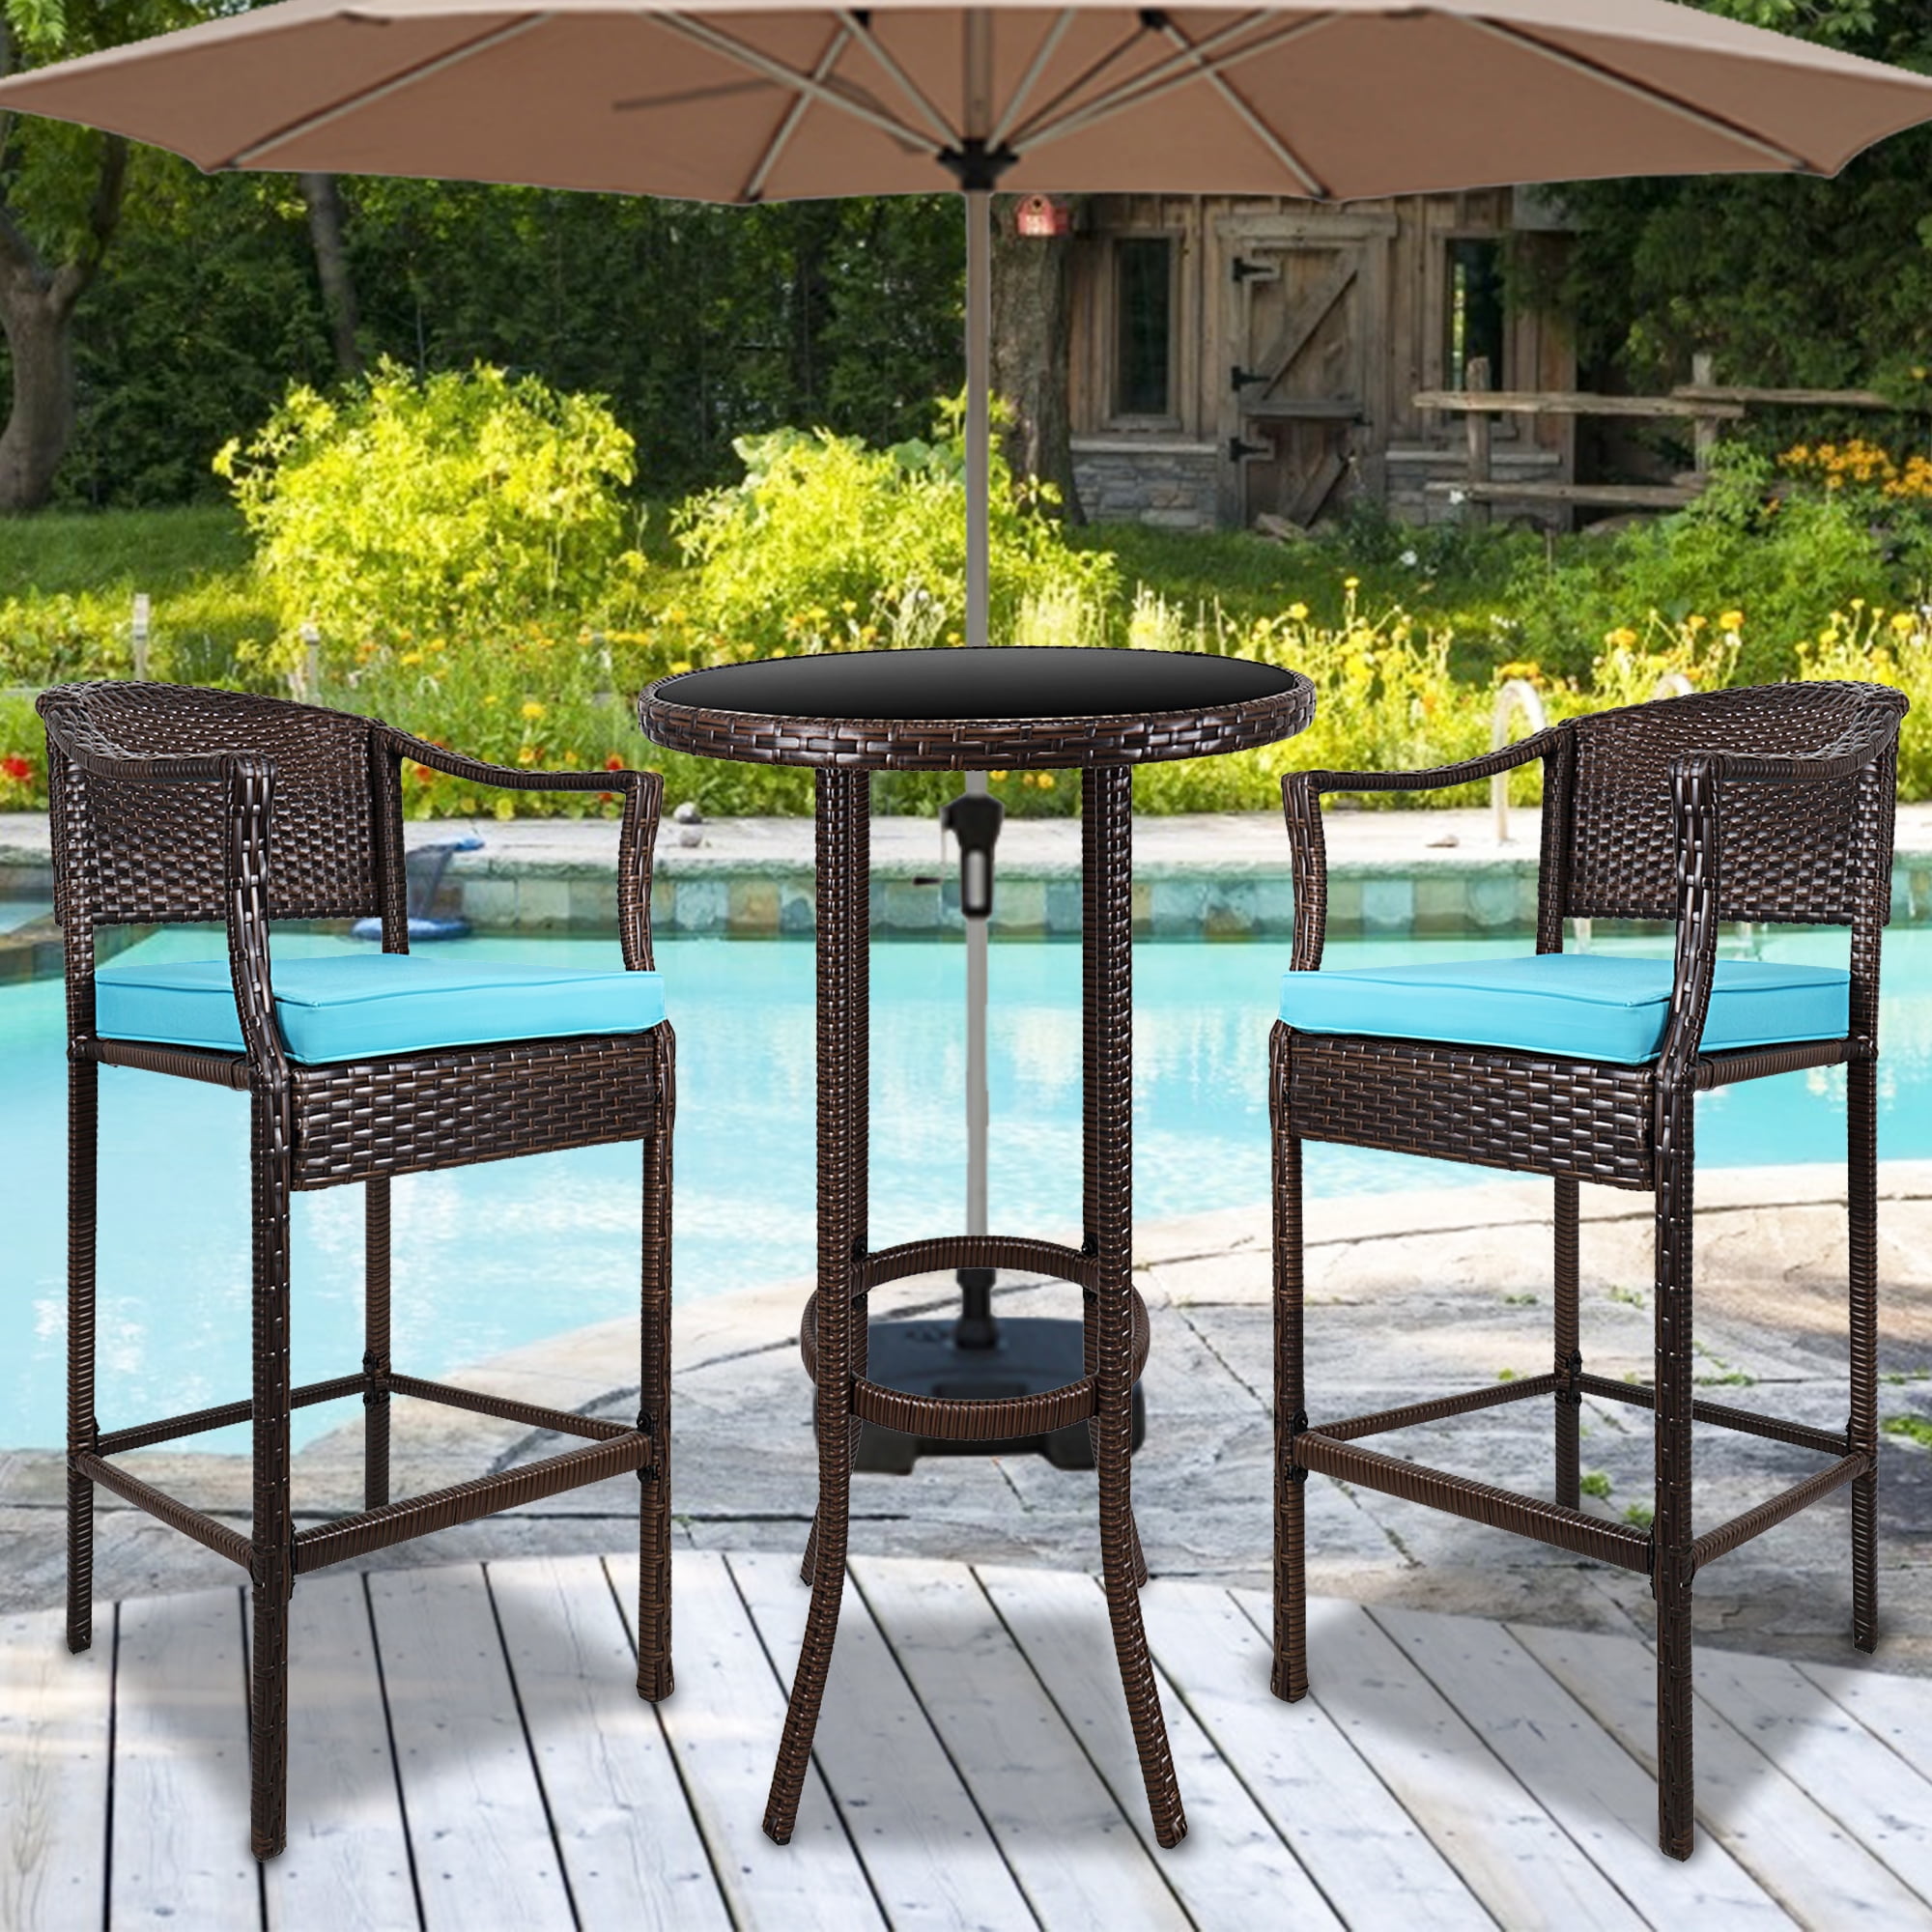 Segmart 3 Pieces Outdoor Bistro Patio Bar Furniture Set, Outdoor Height Bar Bistro Table Set with High Top Table and 2 Pieces High Chair, PE Wicker Rattan Bar Chairs Set with Cushion for Poolside, SS300